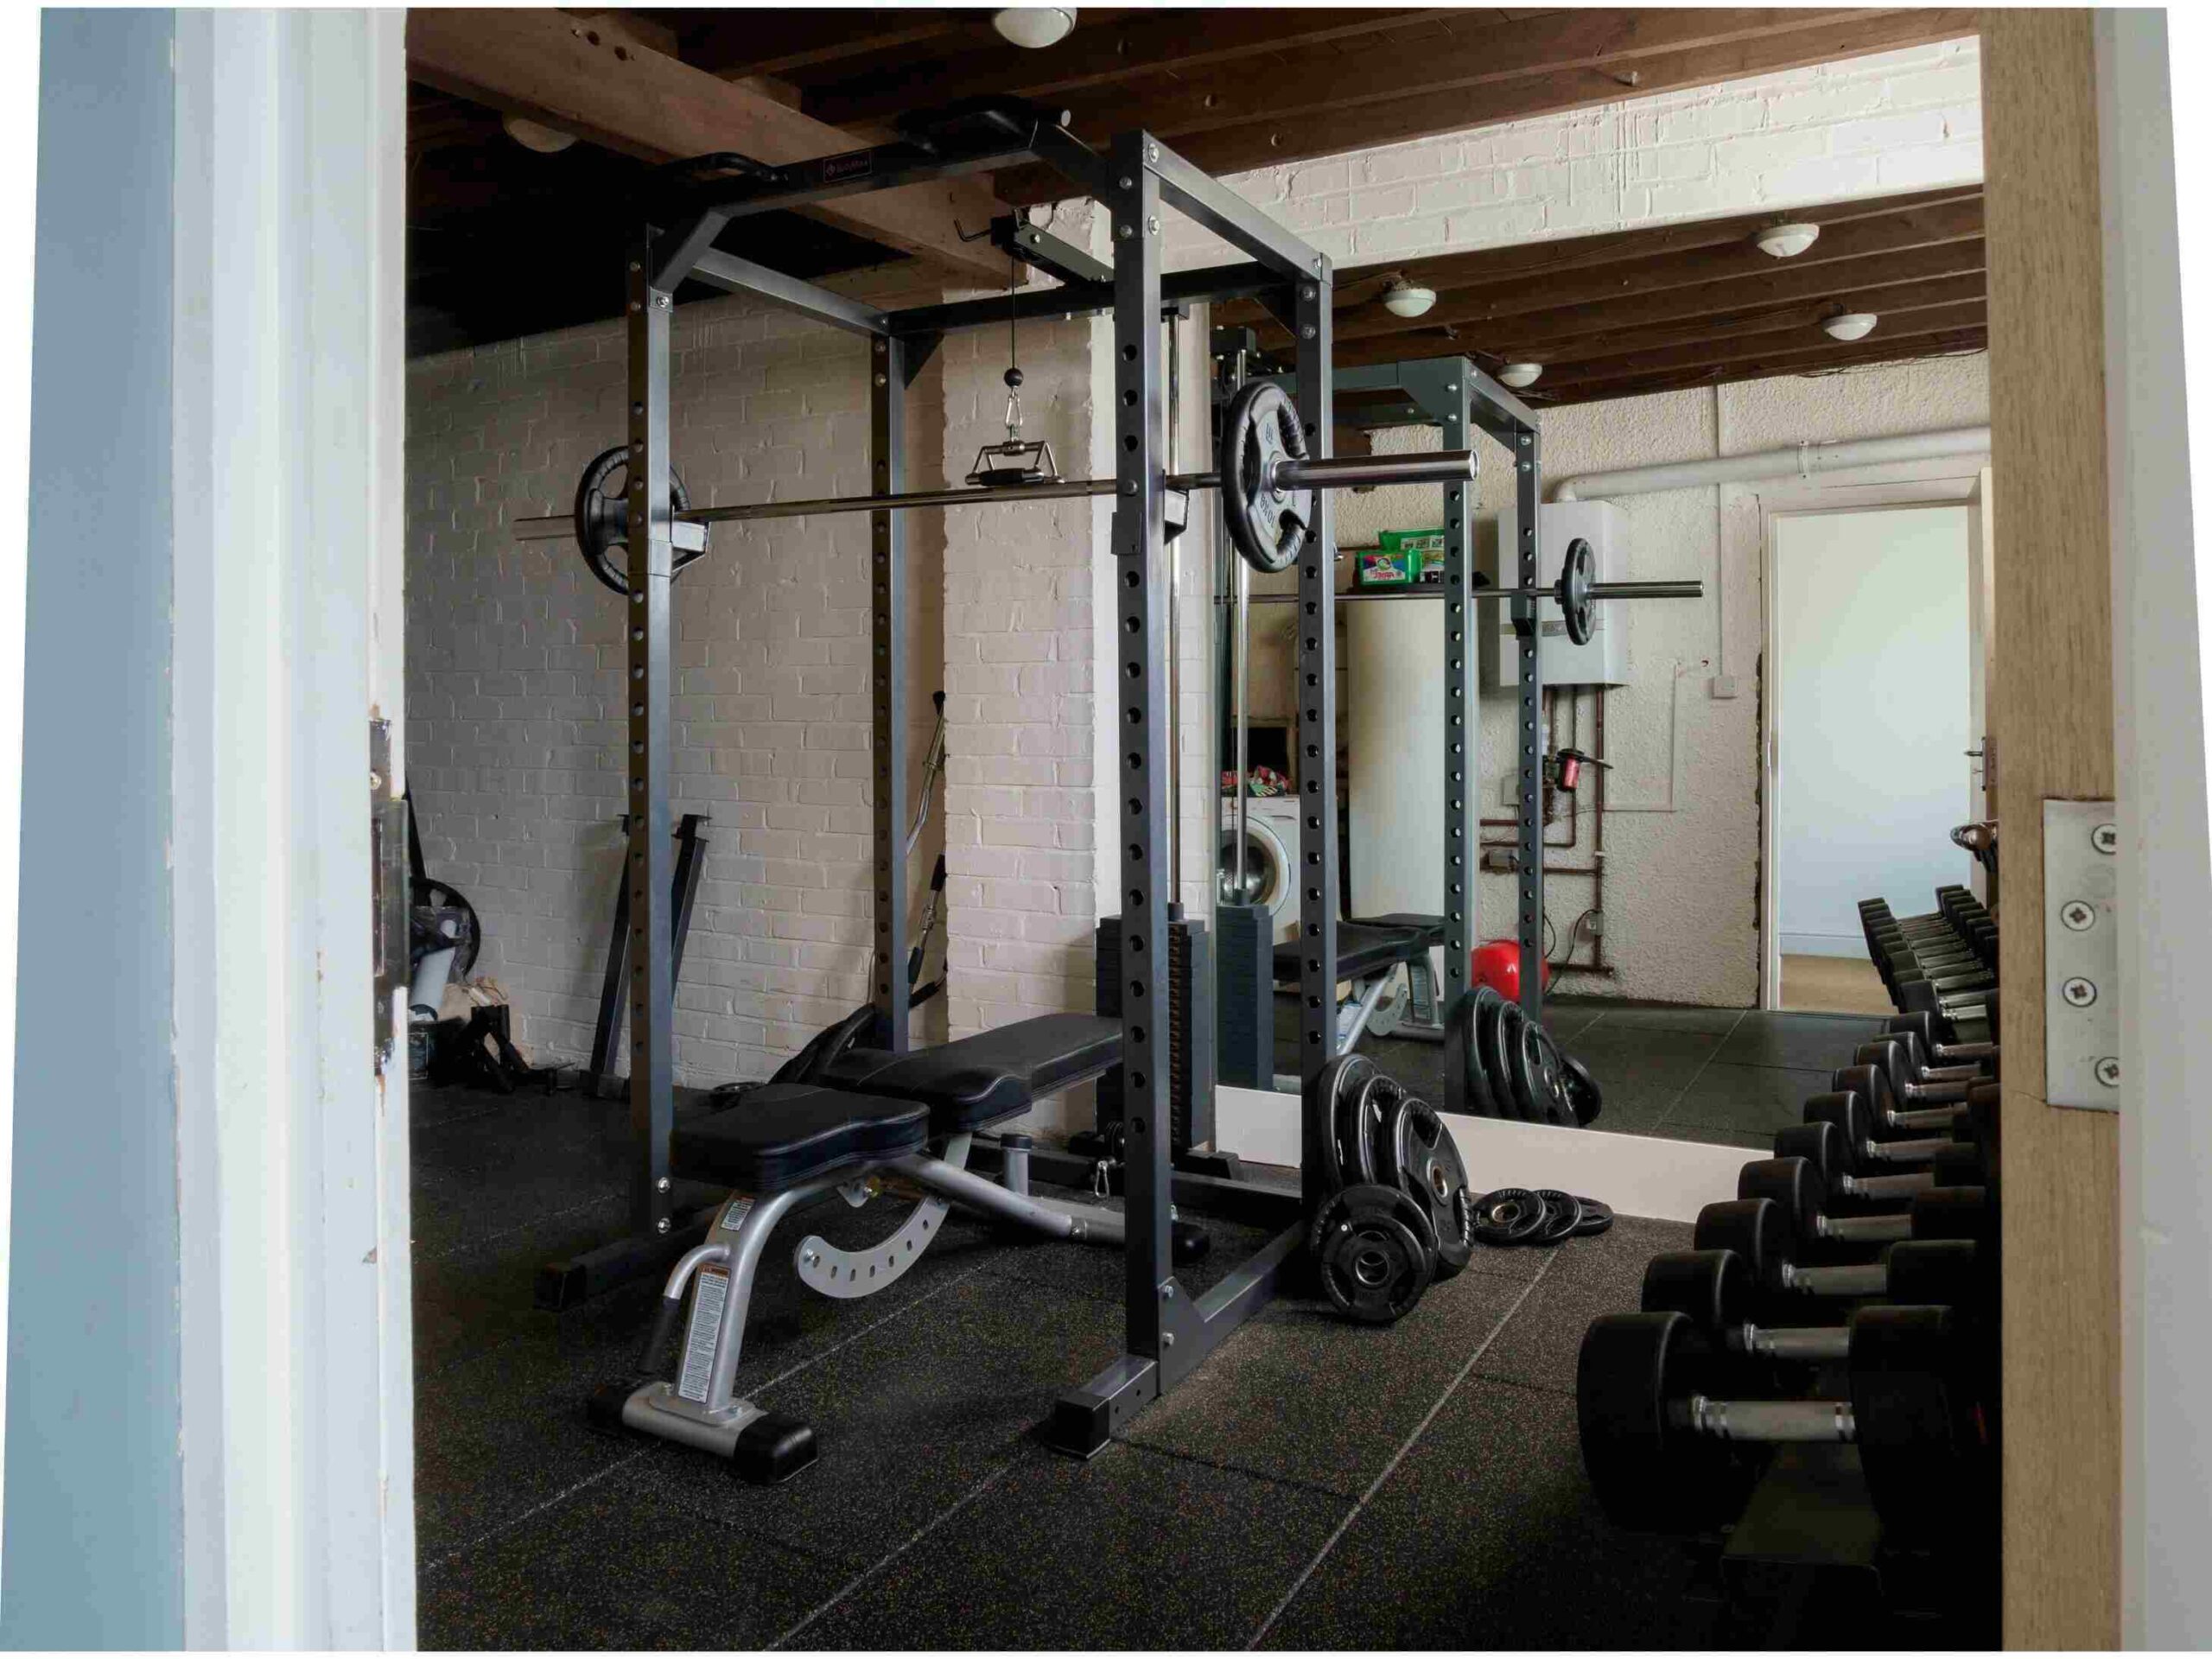 after professional decluttering plenty of space can be created to cnvert a part of your garage into a great small personal gym